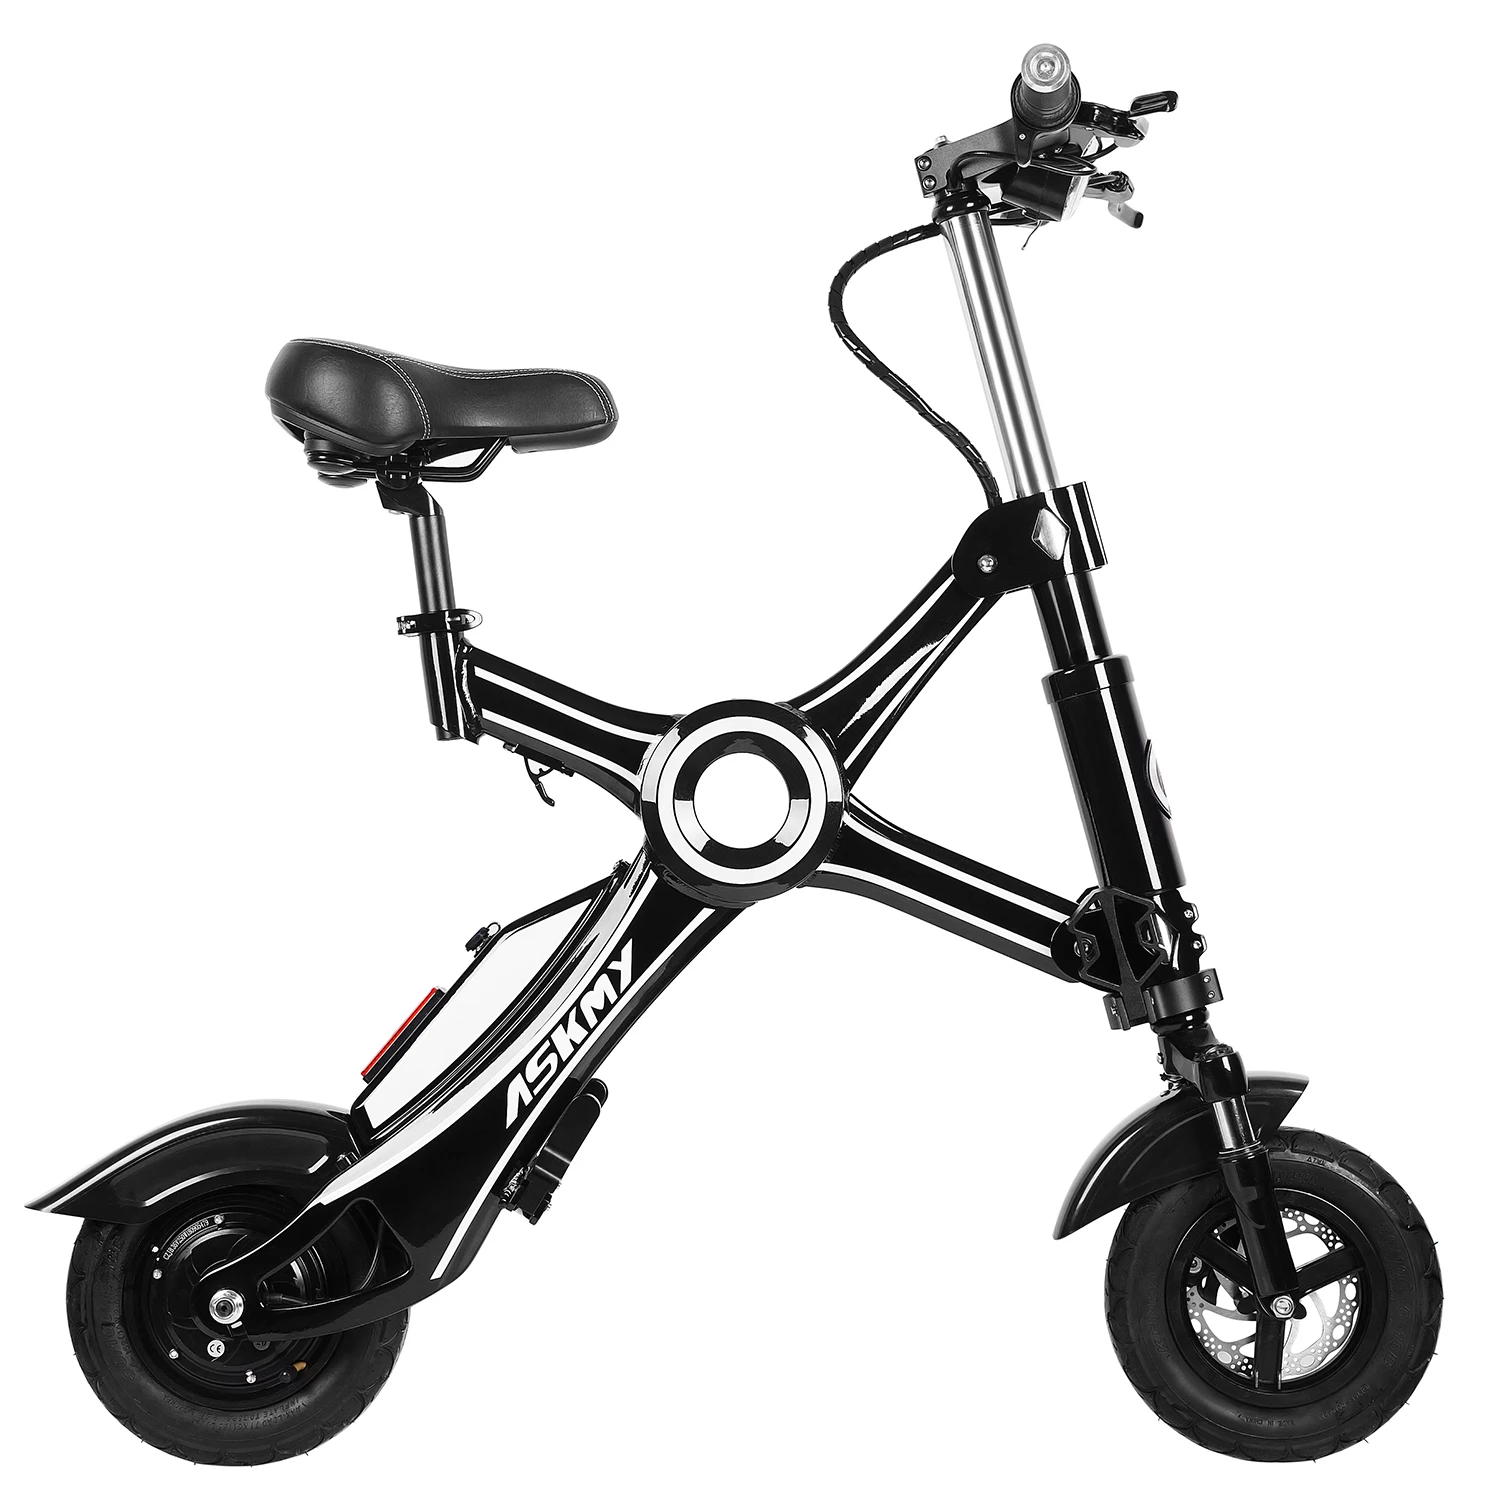 

ASKMY X1 Electric Bicycle Bikes Fast Folding E Bike Electrical For Adult 10 inch 250W Bikes Cycle Stock Wholesale